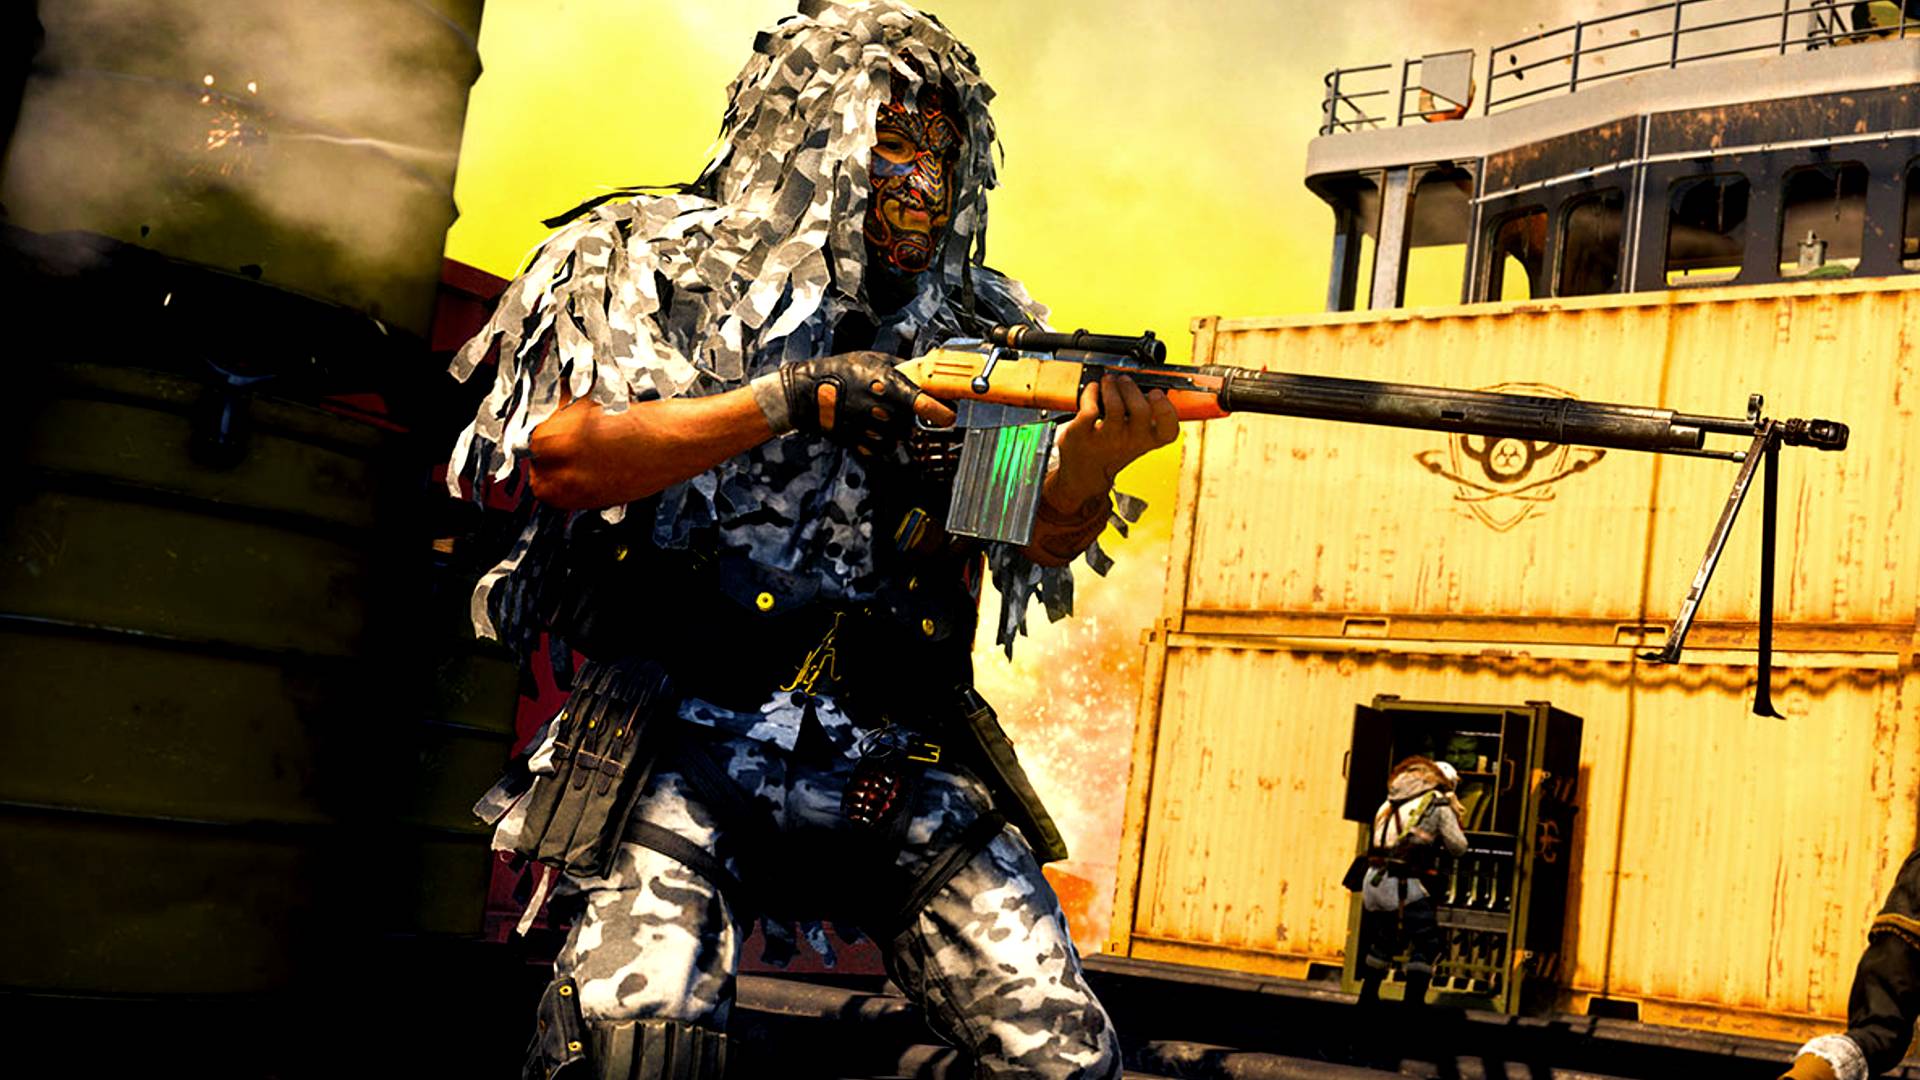 Rebirth Island Reinforced is going to make or break Call of Duty